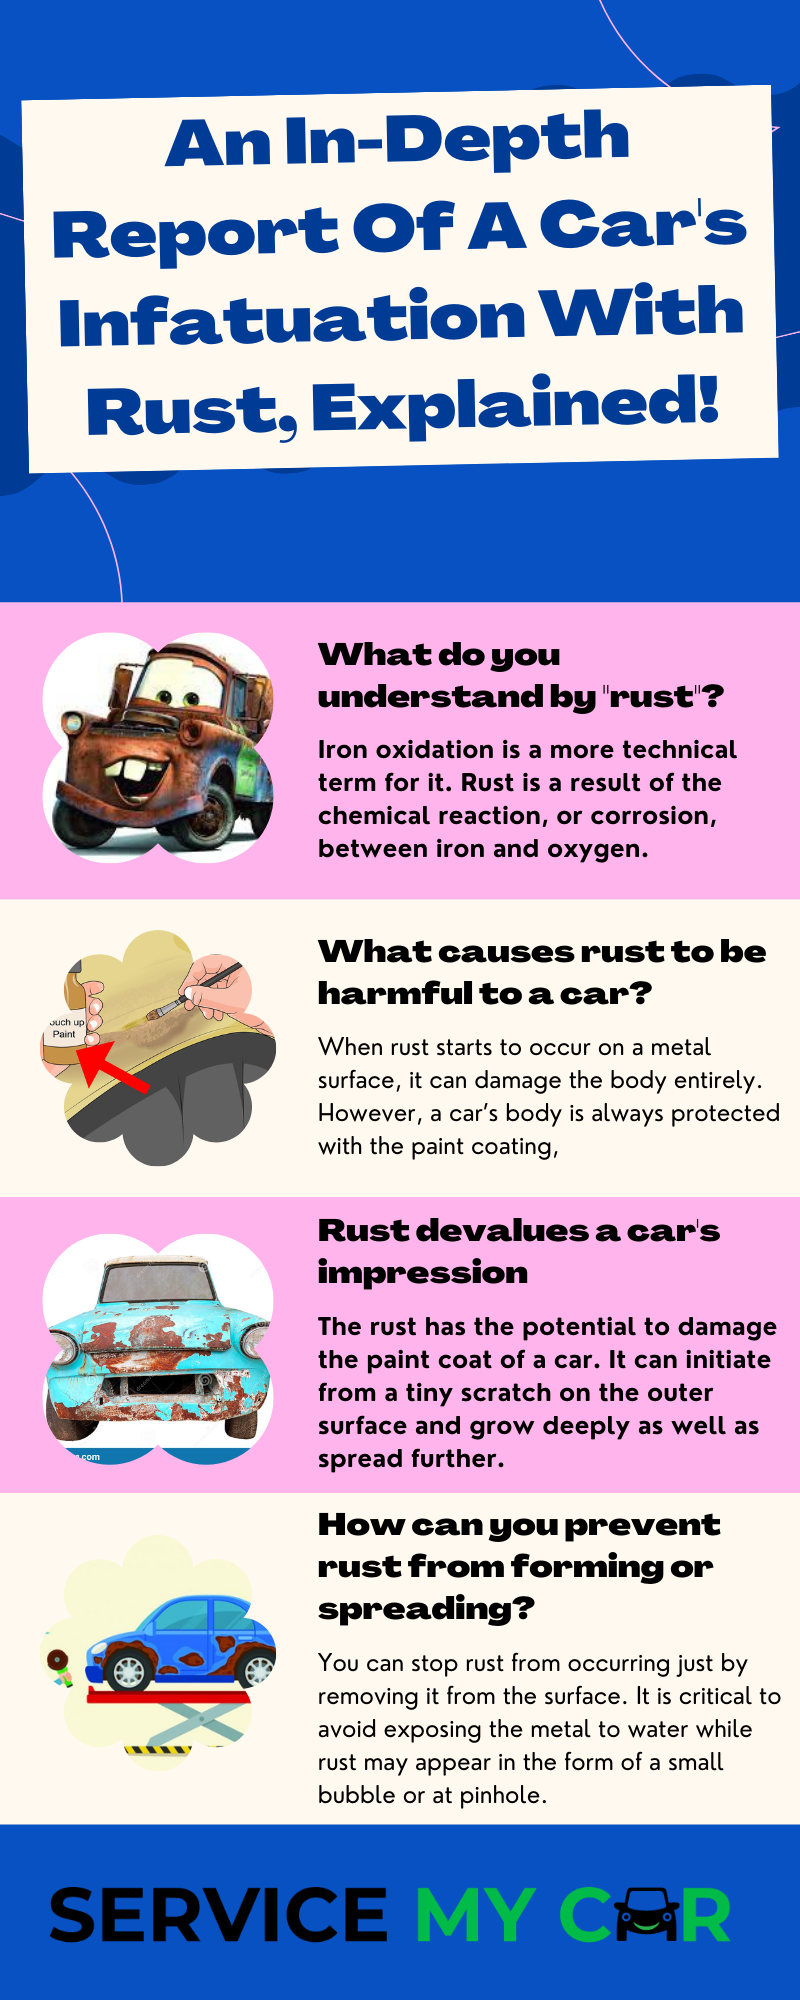 An In-Depth Report Of A Car's Infatuation With Rust, Explained!